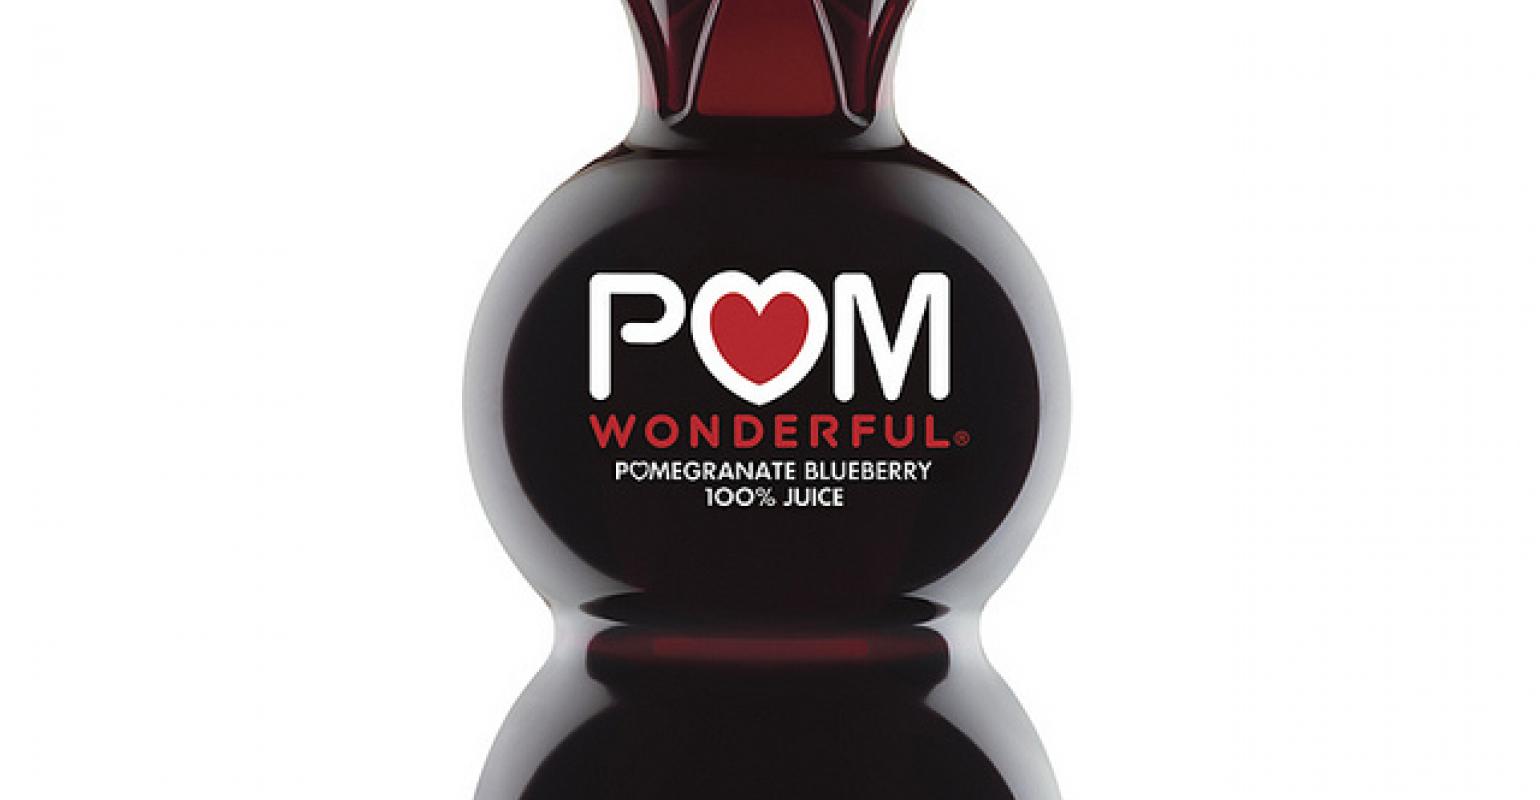 Is POM As Wonderful As It Claims? - Organic Authority